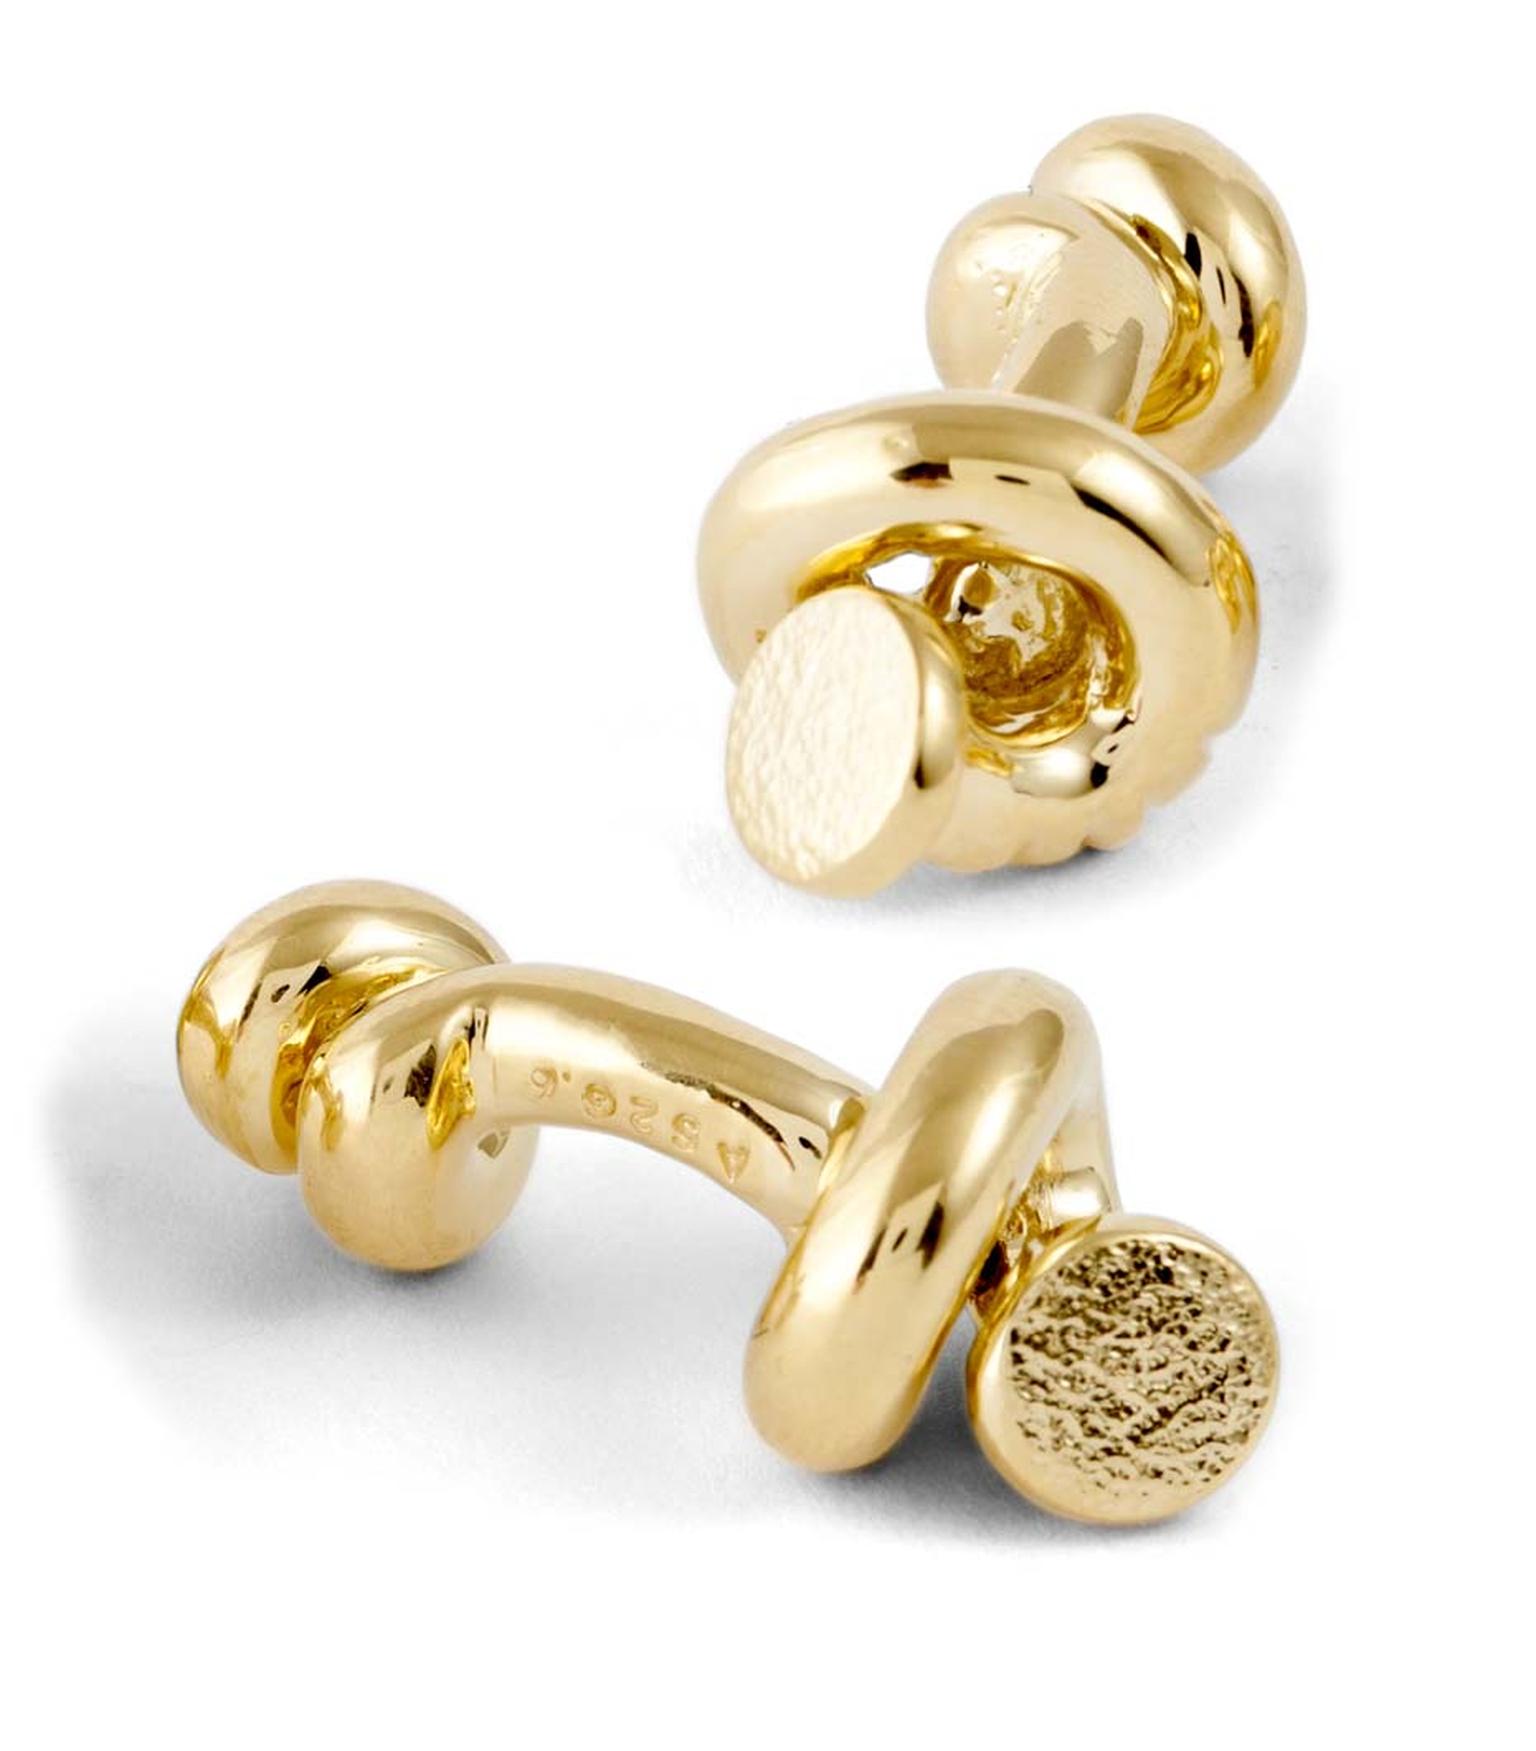 David Webb Tool Chest Collection Knotted Nail cufflinks feature the signature David Webb hammered finish at the head of each nail.